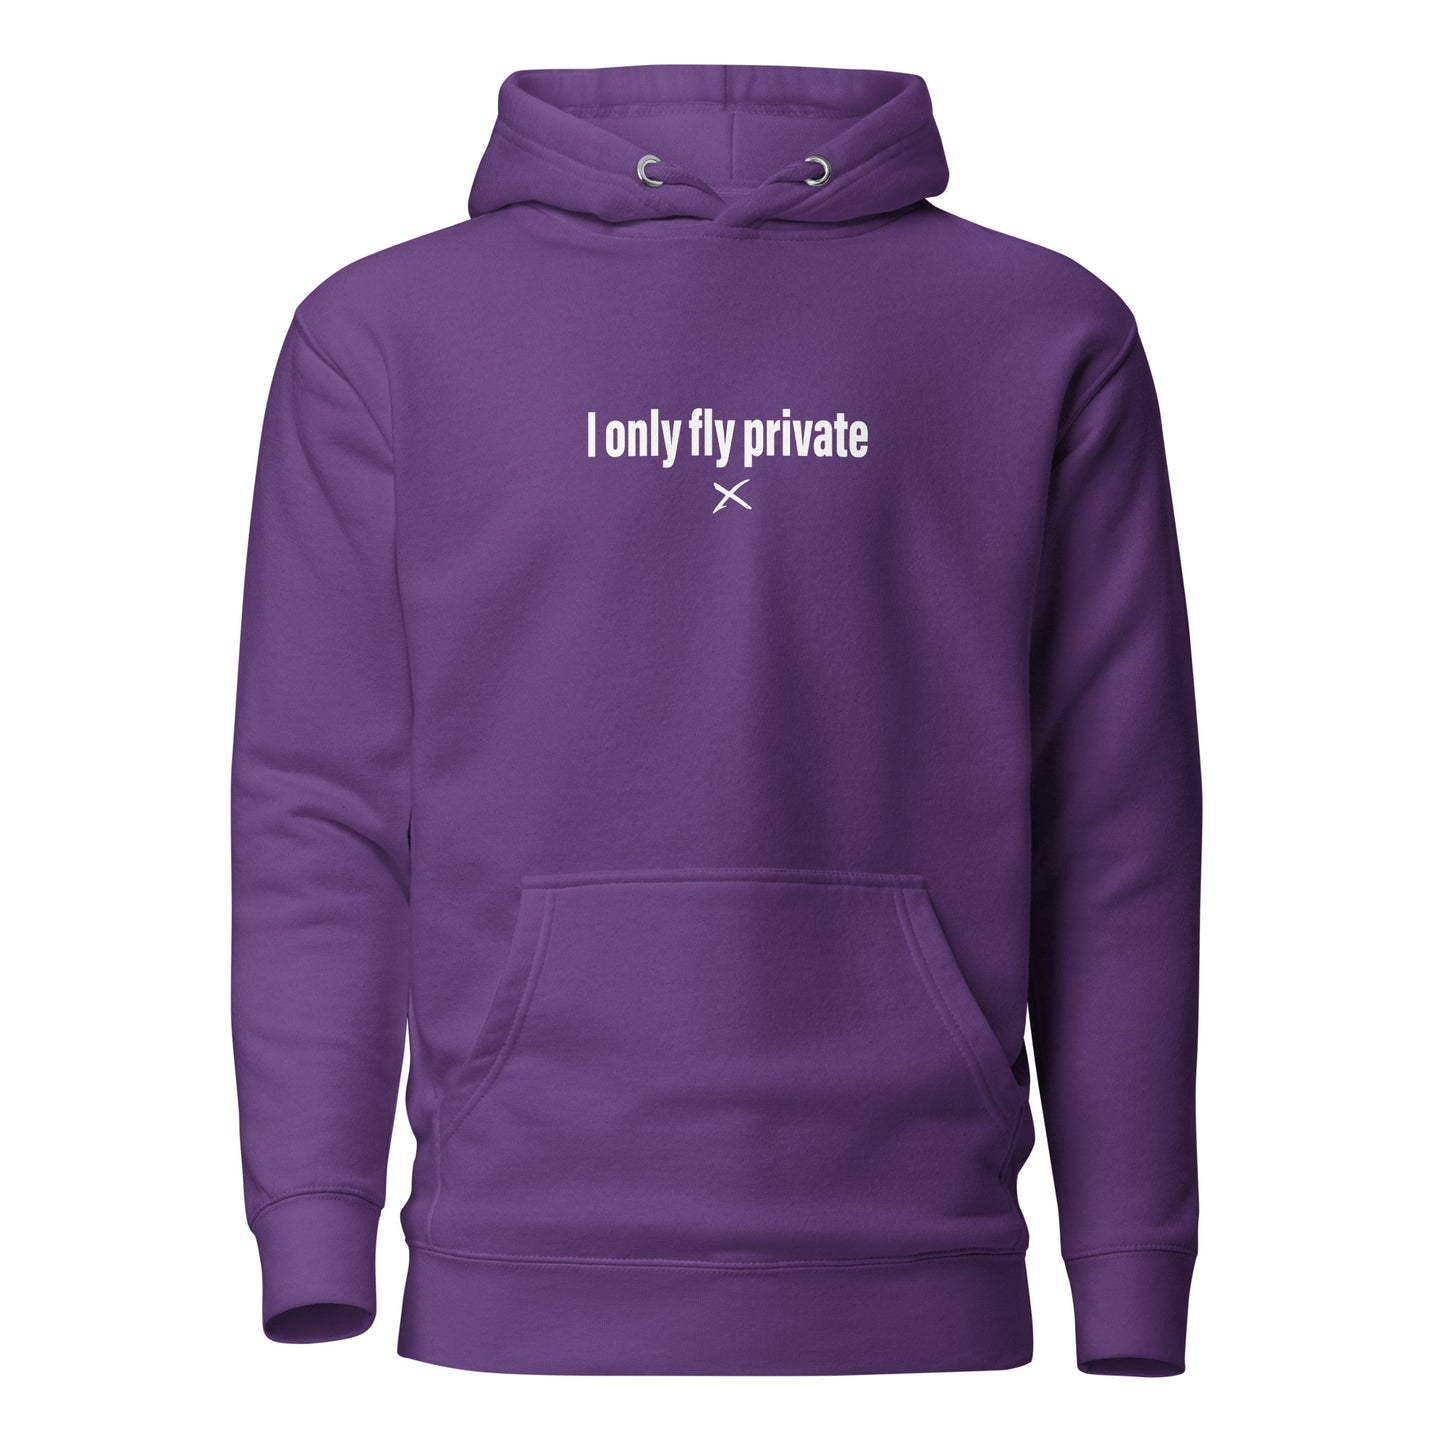 I only fly private - Hoodie